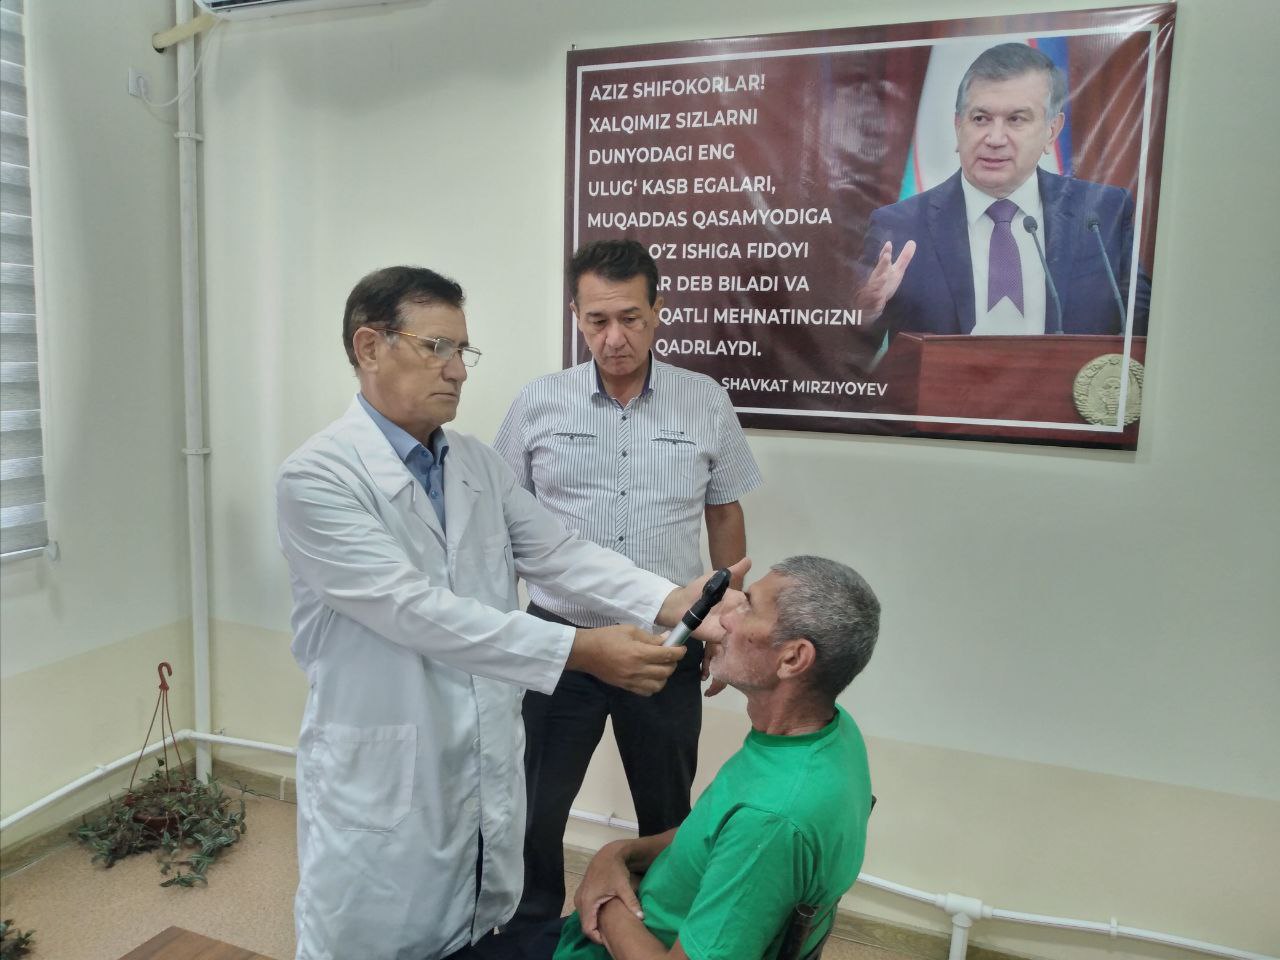 COMPREHENSIVE MEDICAL EXAMINATION HAS BEEN CARRIED OUT IN “MURUVVAT” BOARDING HOME FOR DISABLED MEN IN BUTAKARA